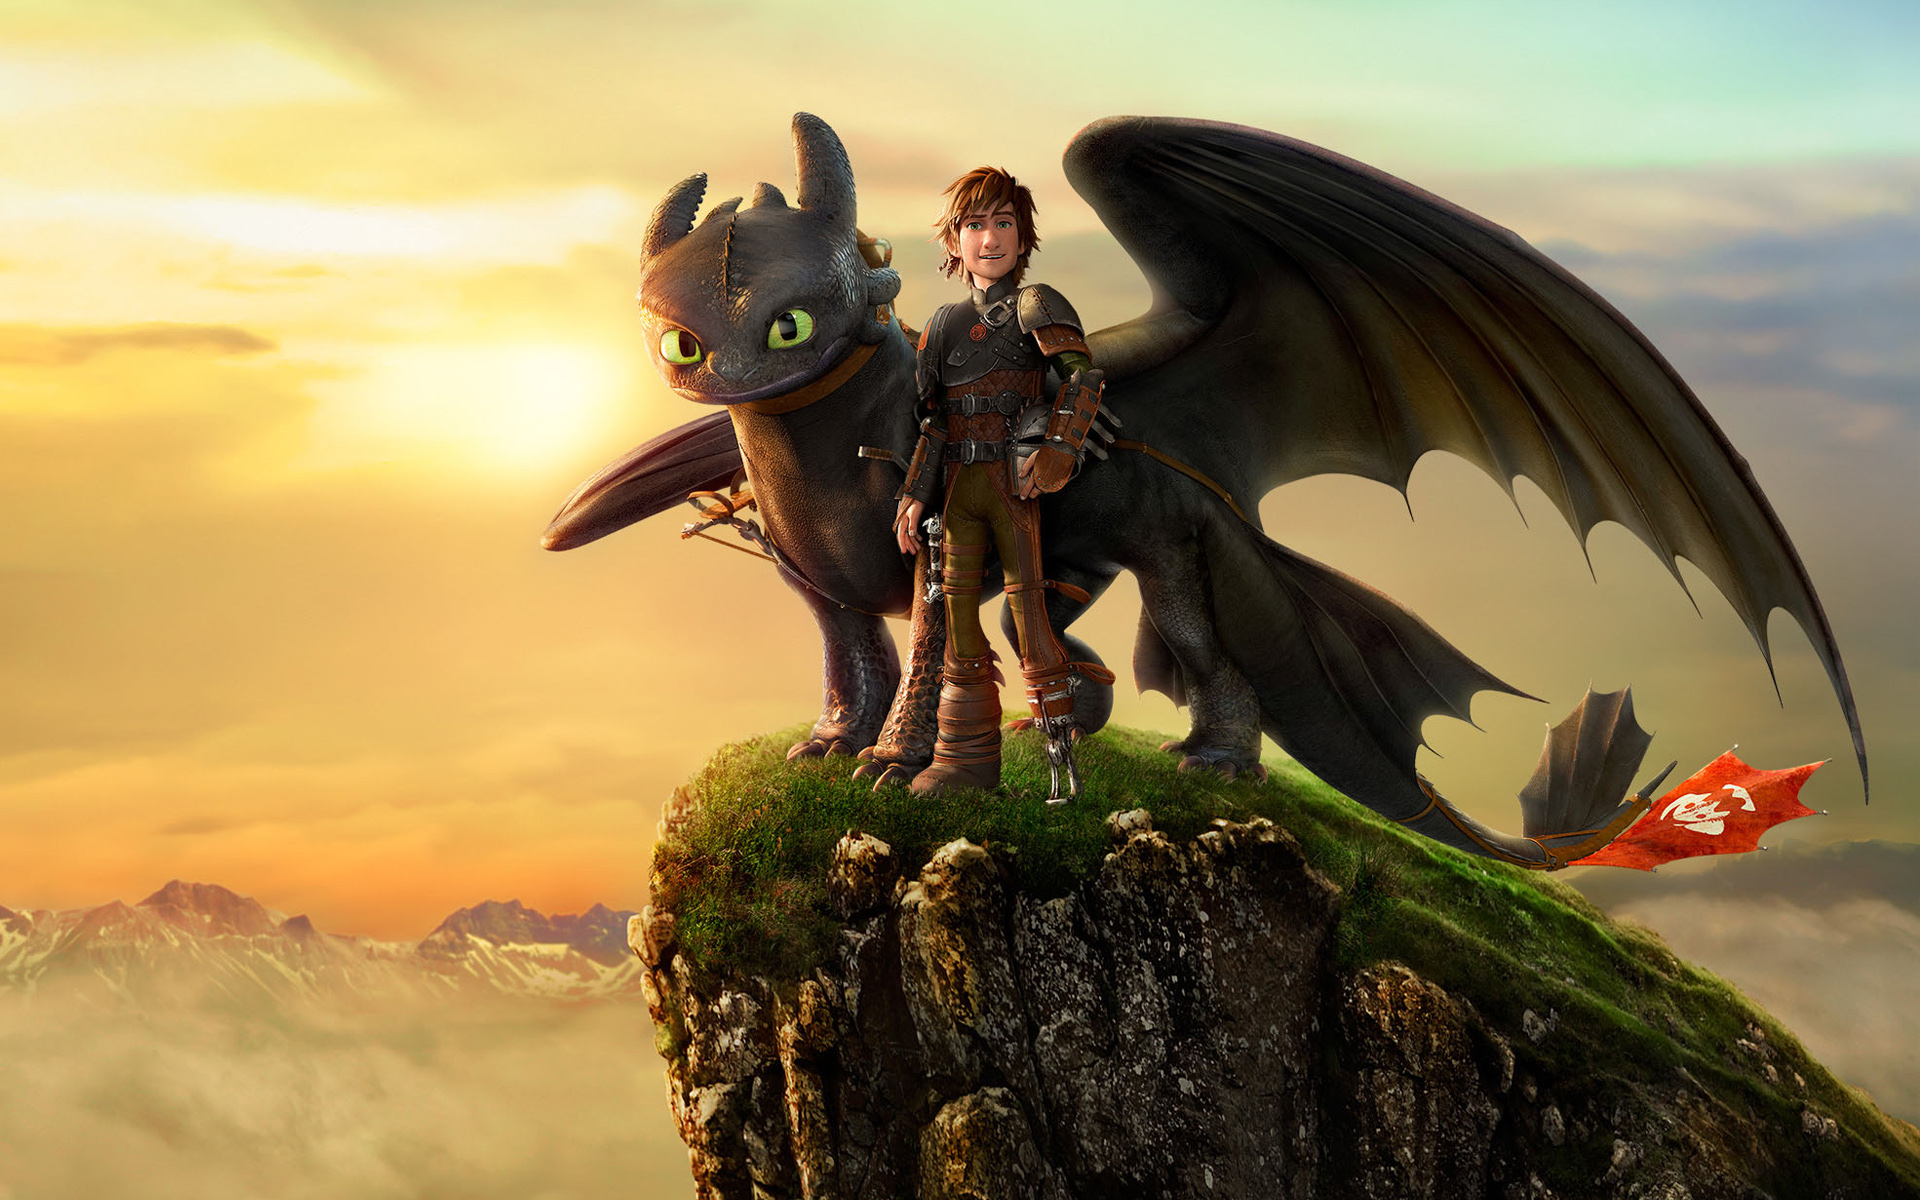 toothless-and-hipcup-in-how-to-train-your-dragon-2.jpg